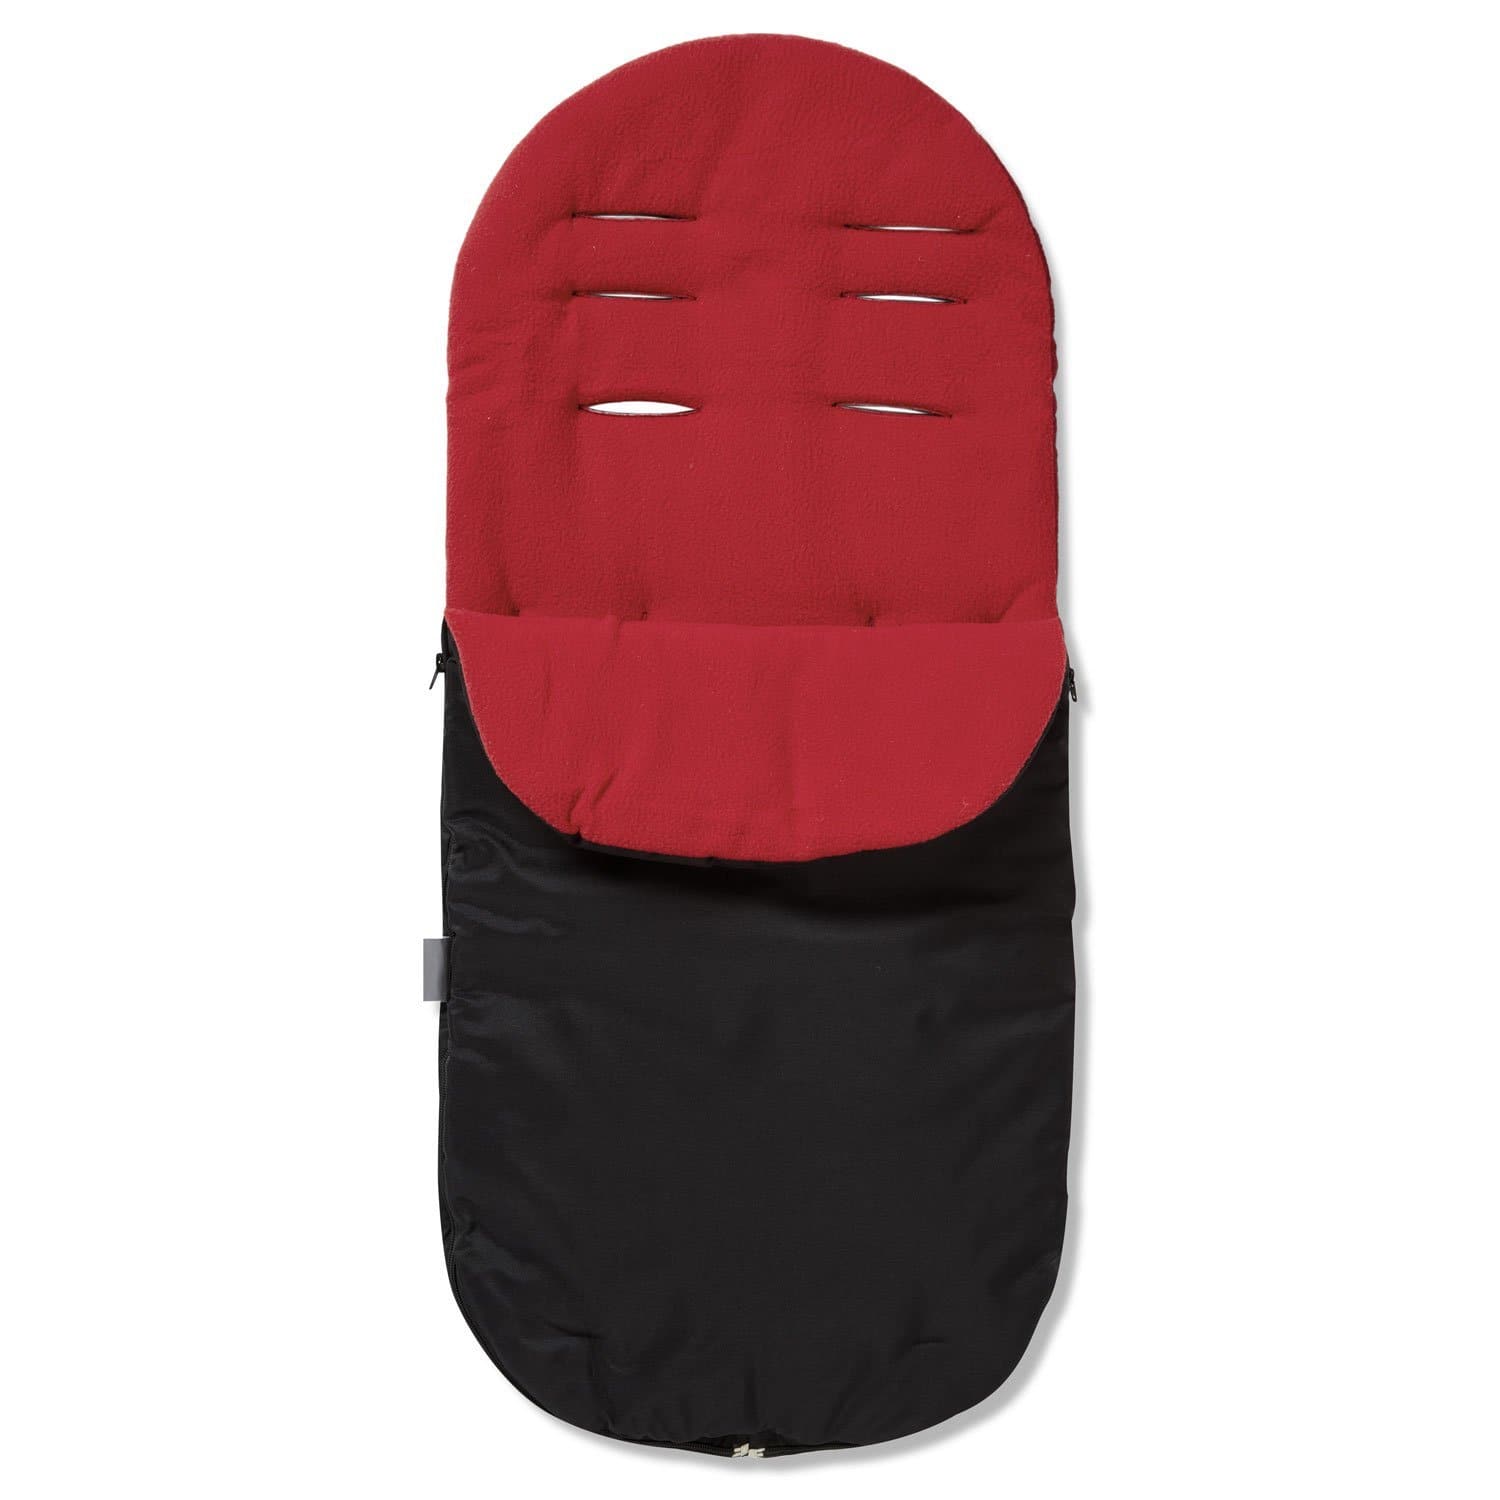 Footmuff / Cosy Toes Compatible with Babylo - Red / Fits All Models | For Your Little One